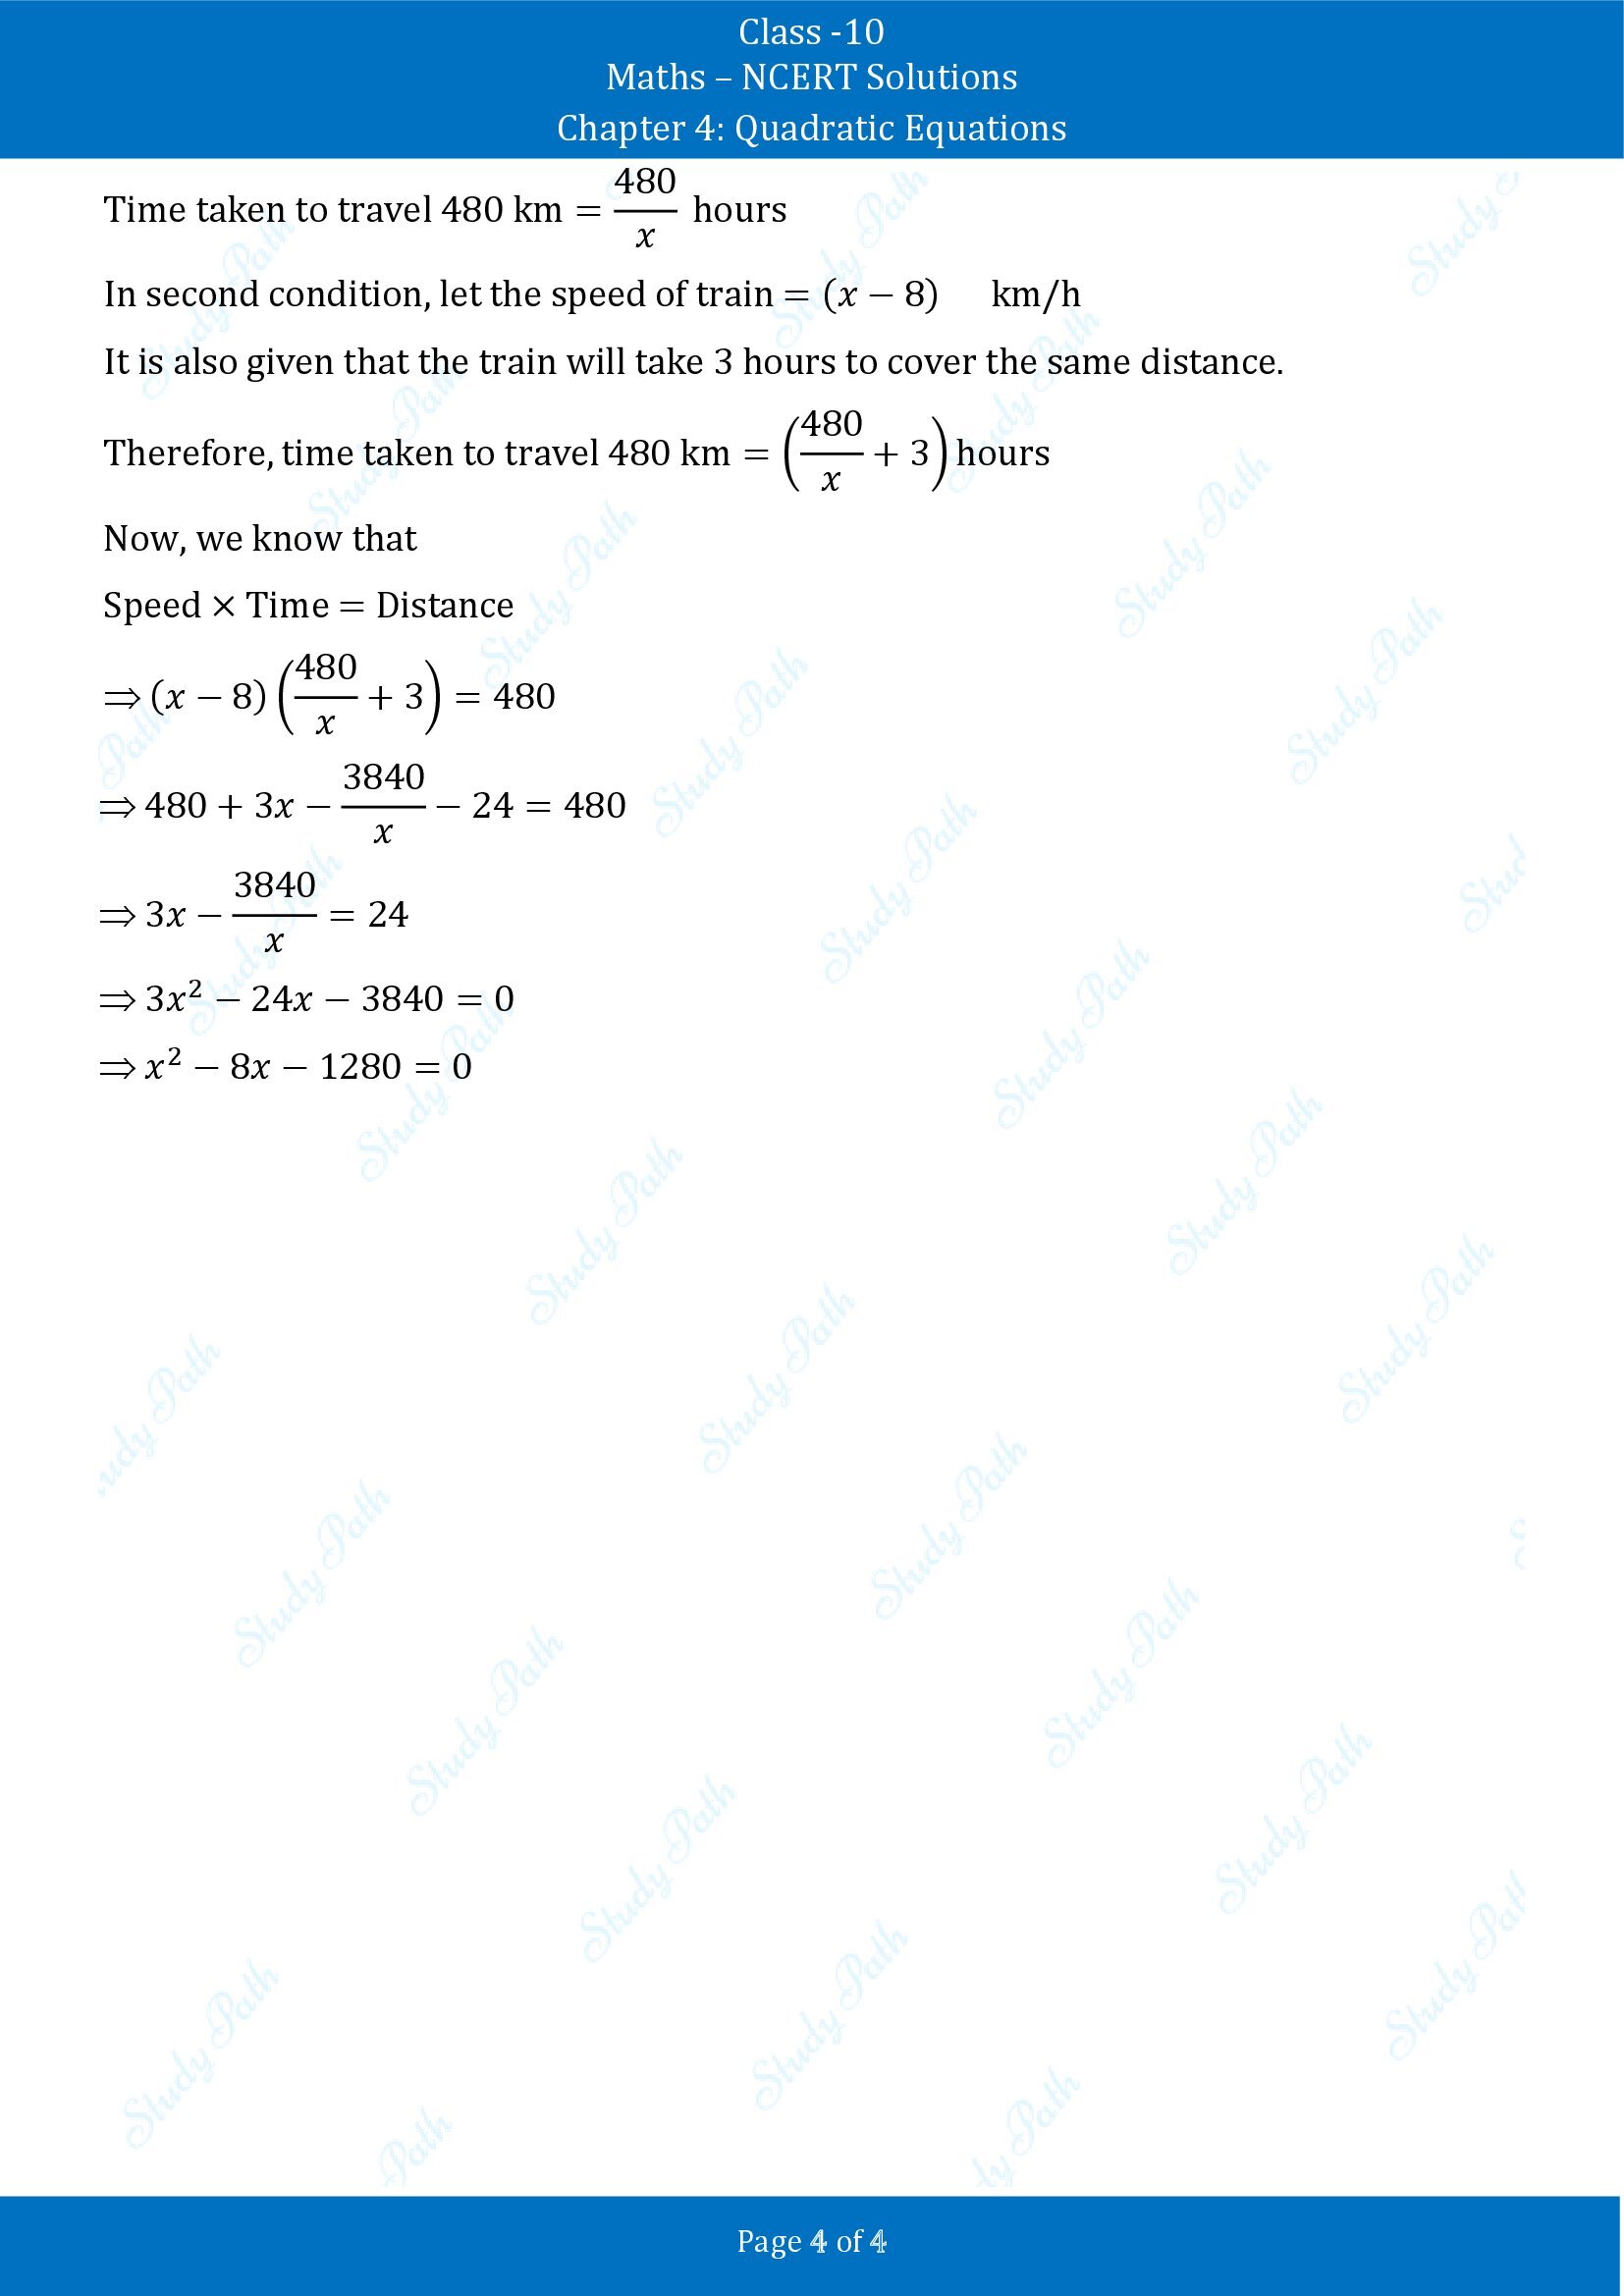 NCERT Solutions for Class 10 Maths Chapter 4 Quadratic Equations Exercise 4.1 00004